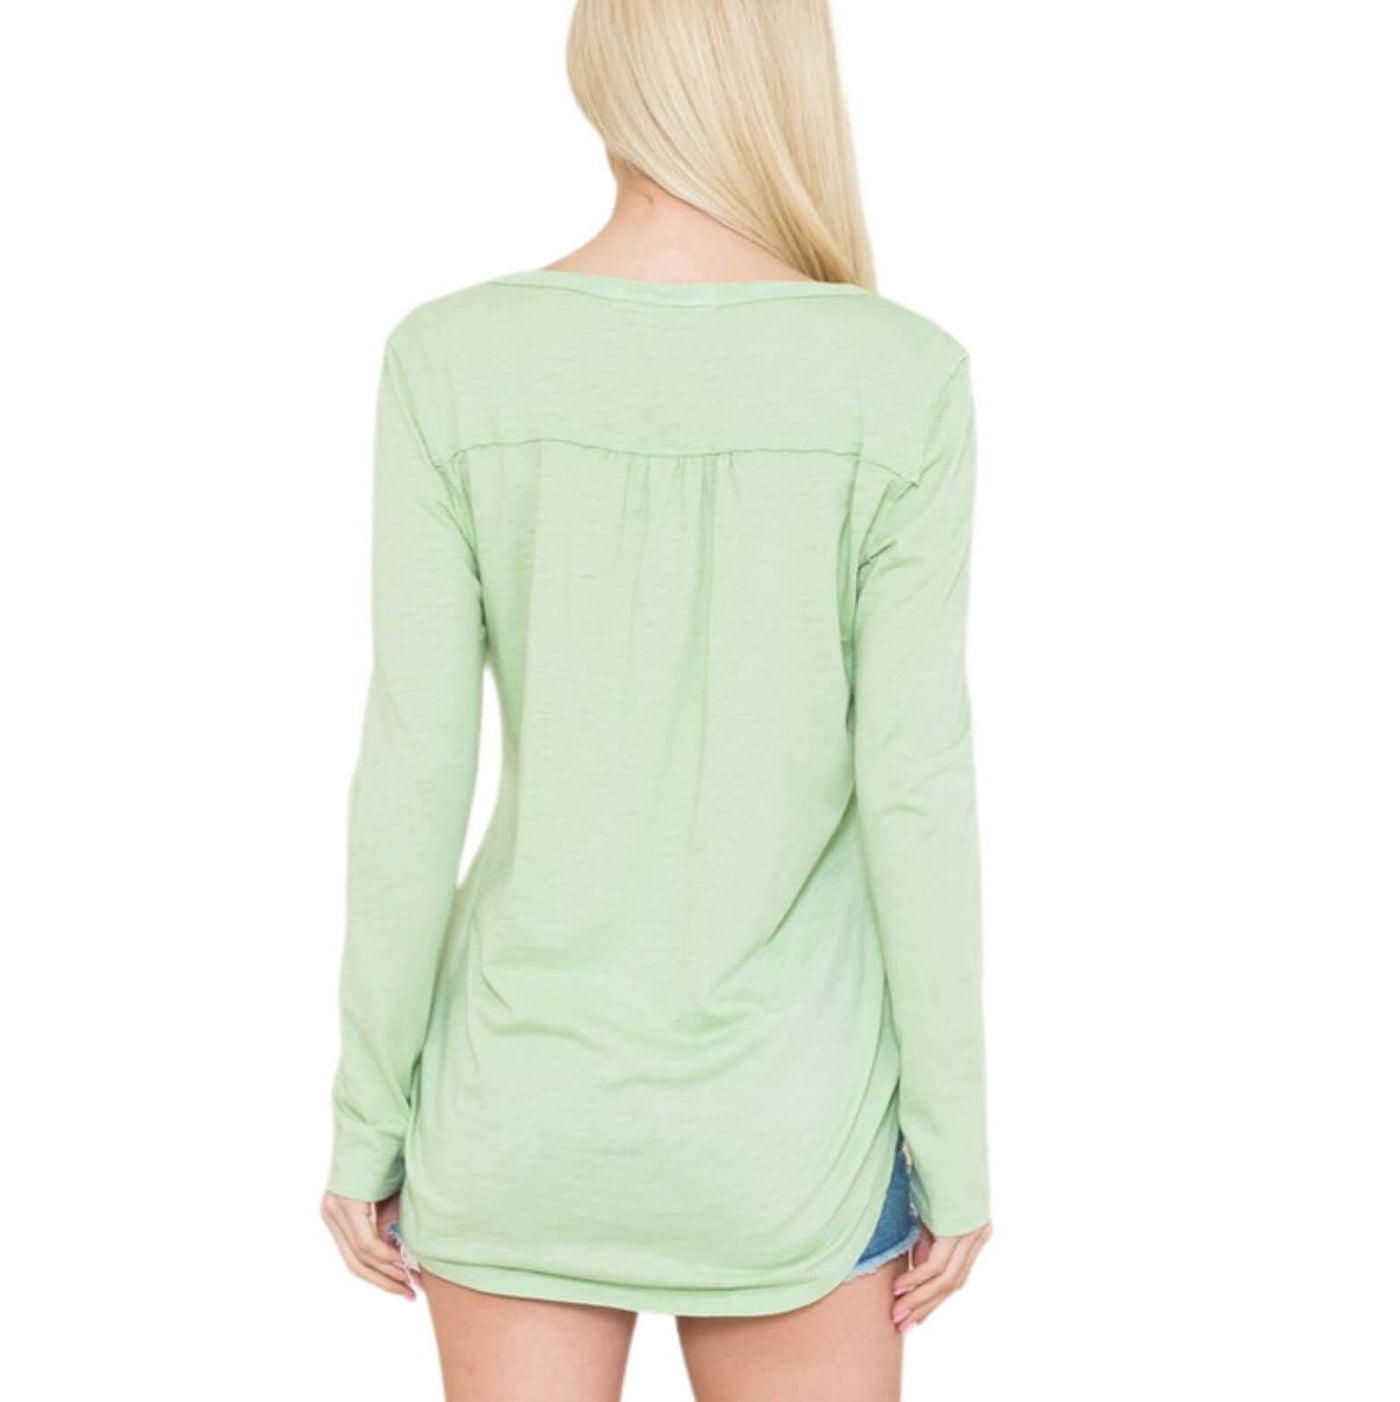 USA Made All Season V-Neck Long Sleeves Lightweight Tee Shirt Perfect for layering Super Soft Material in Pale Apple Green | Classy Cozy Cool Made in America Clothing Boutique